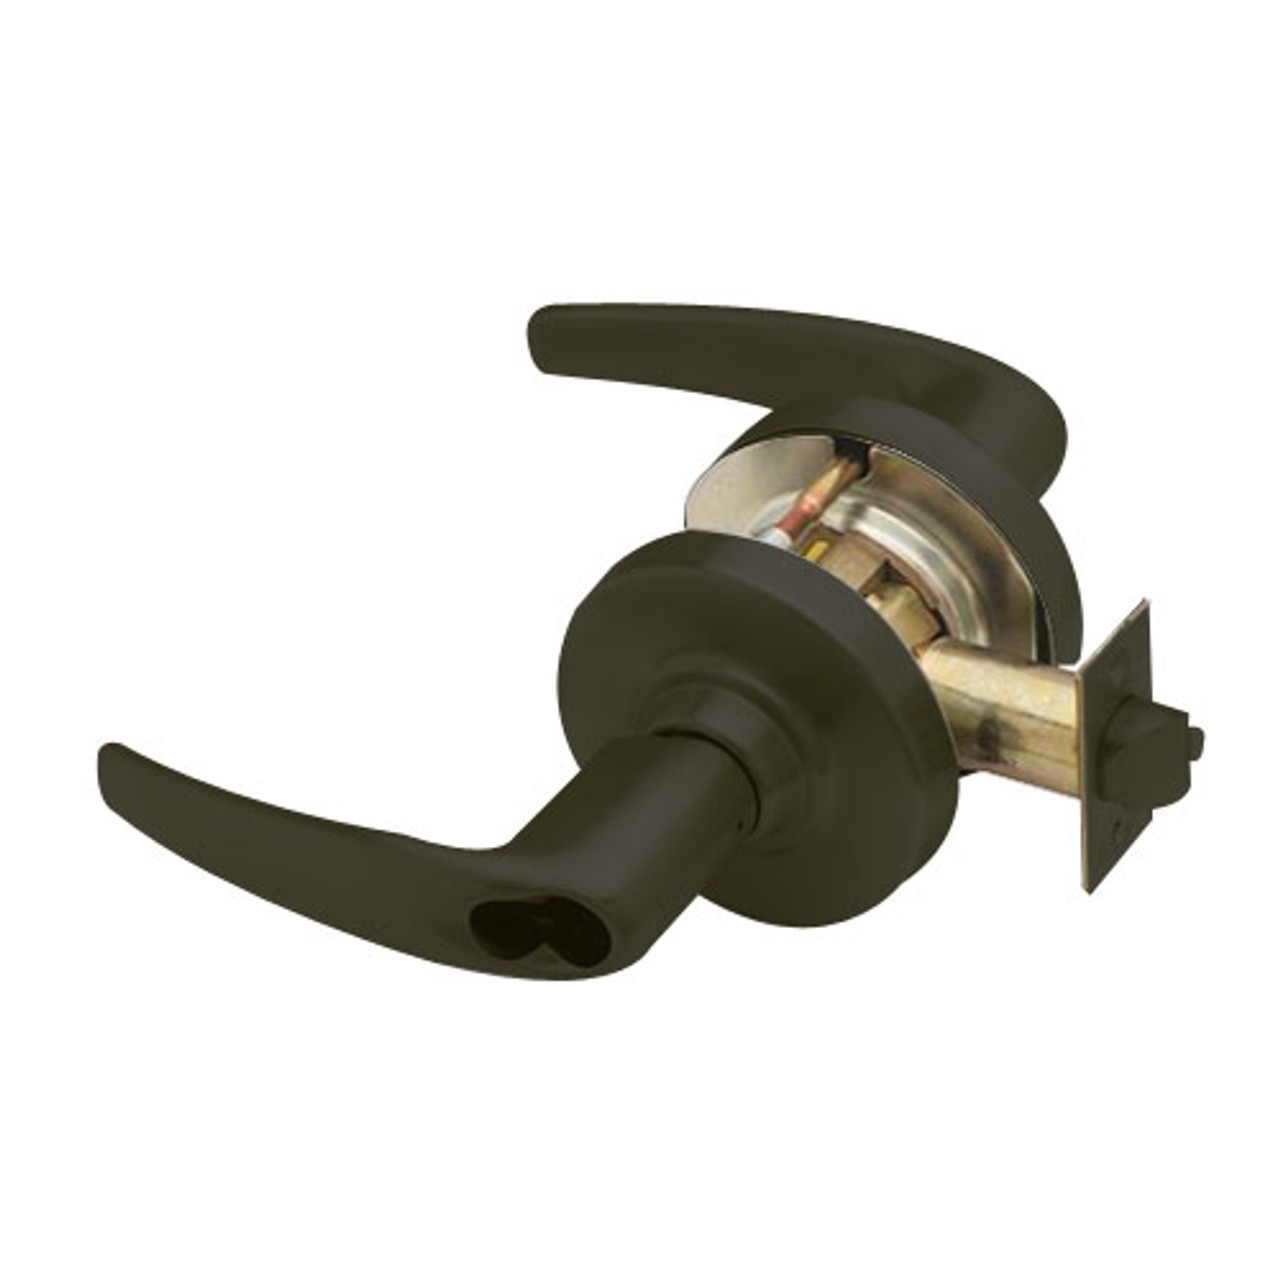 ND80JDEL-ATH-613 Schlage Athens Cylindrical Lock in Oil Rubbed Bronze